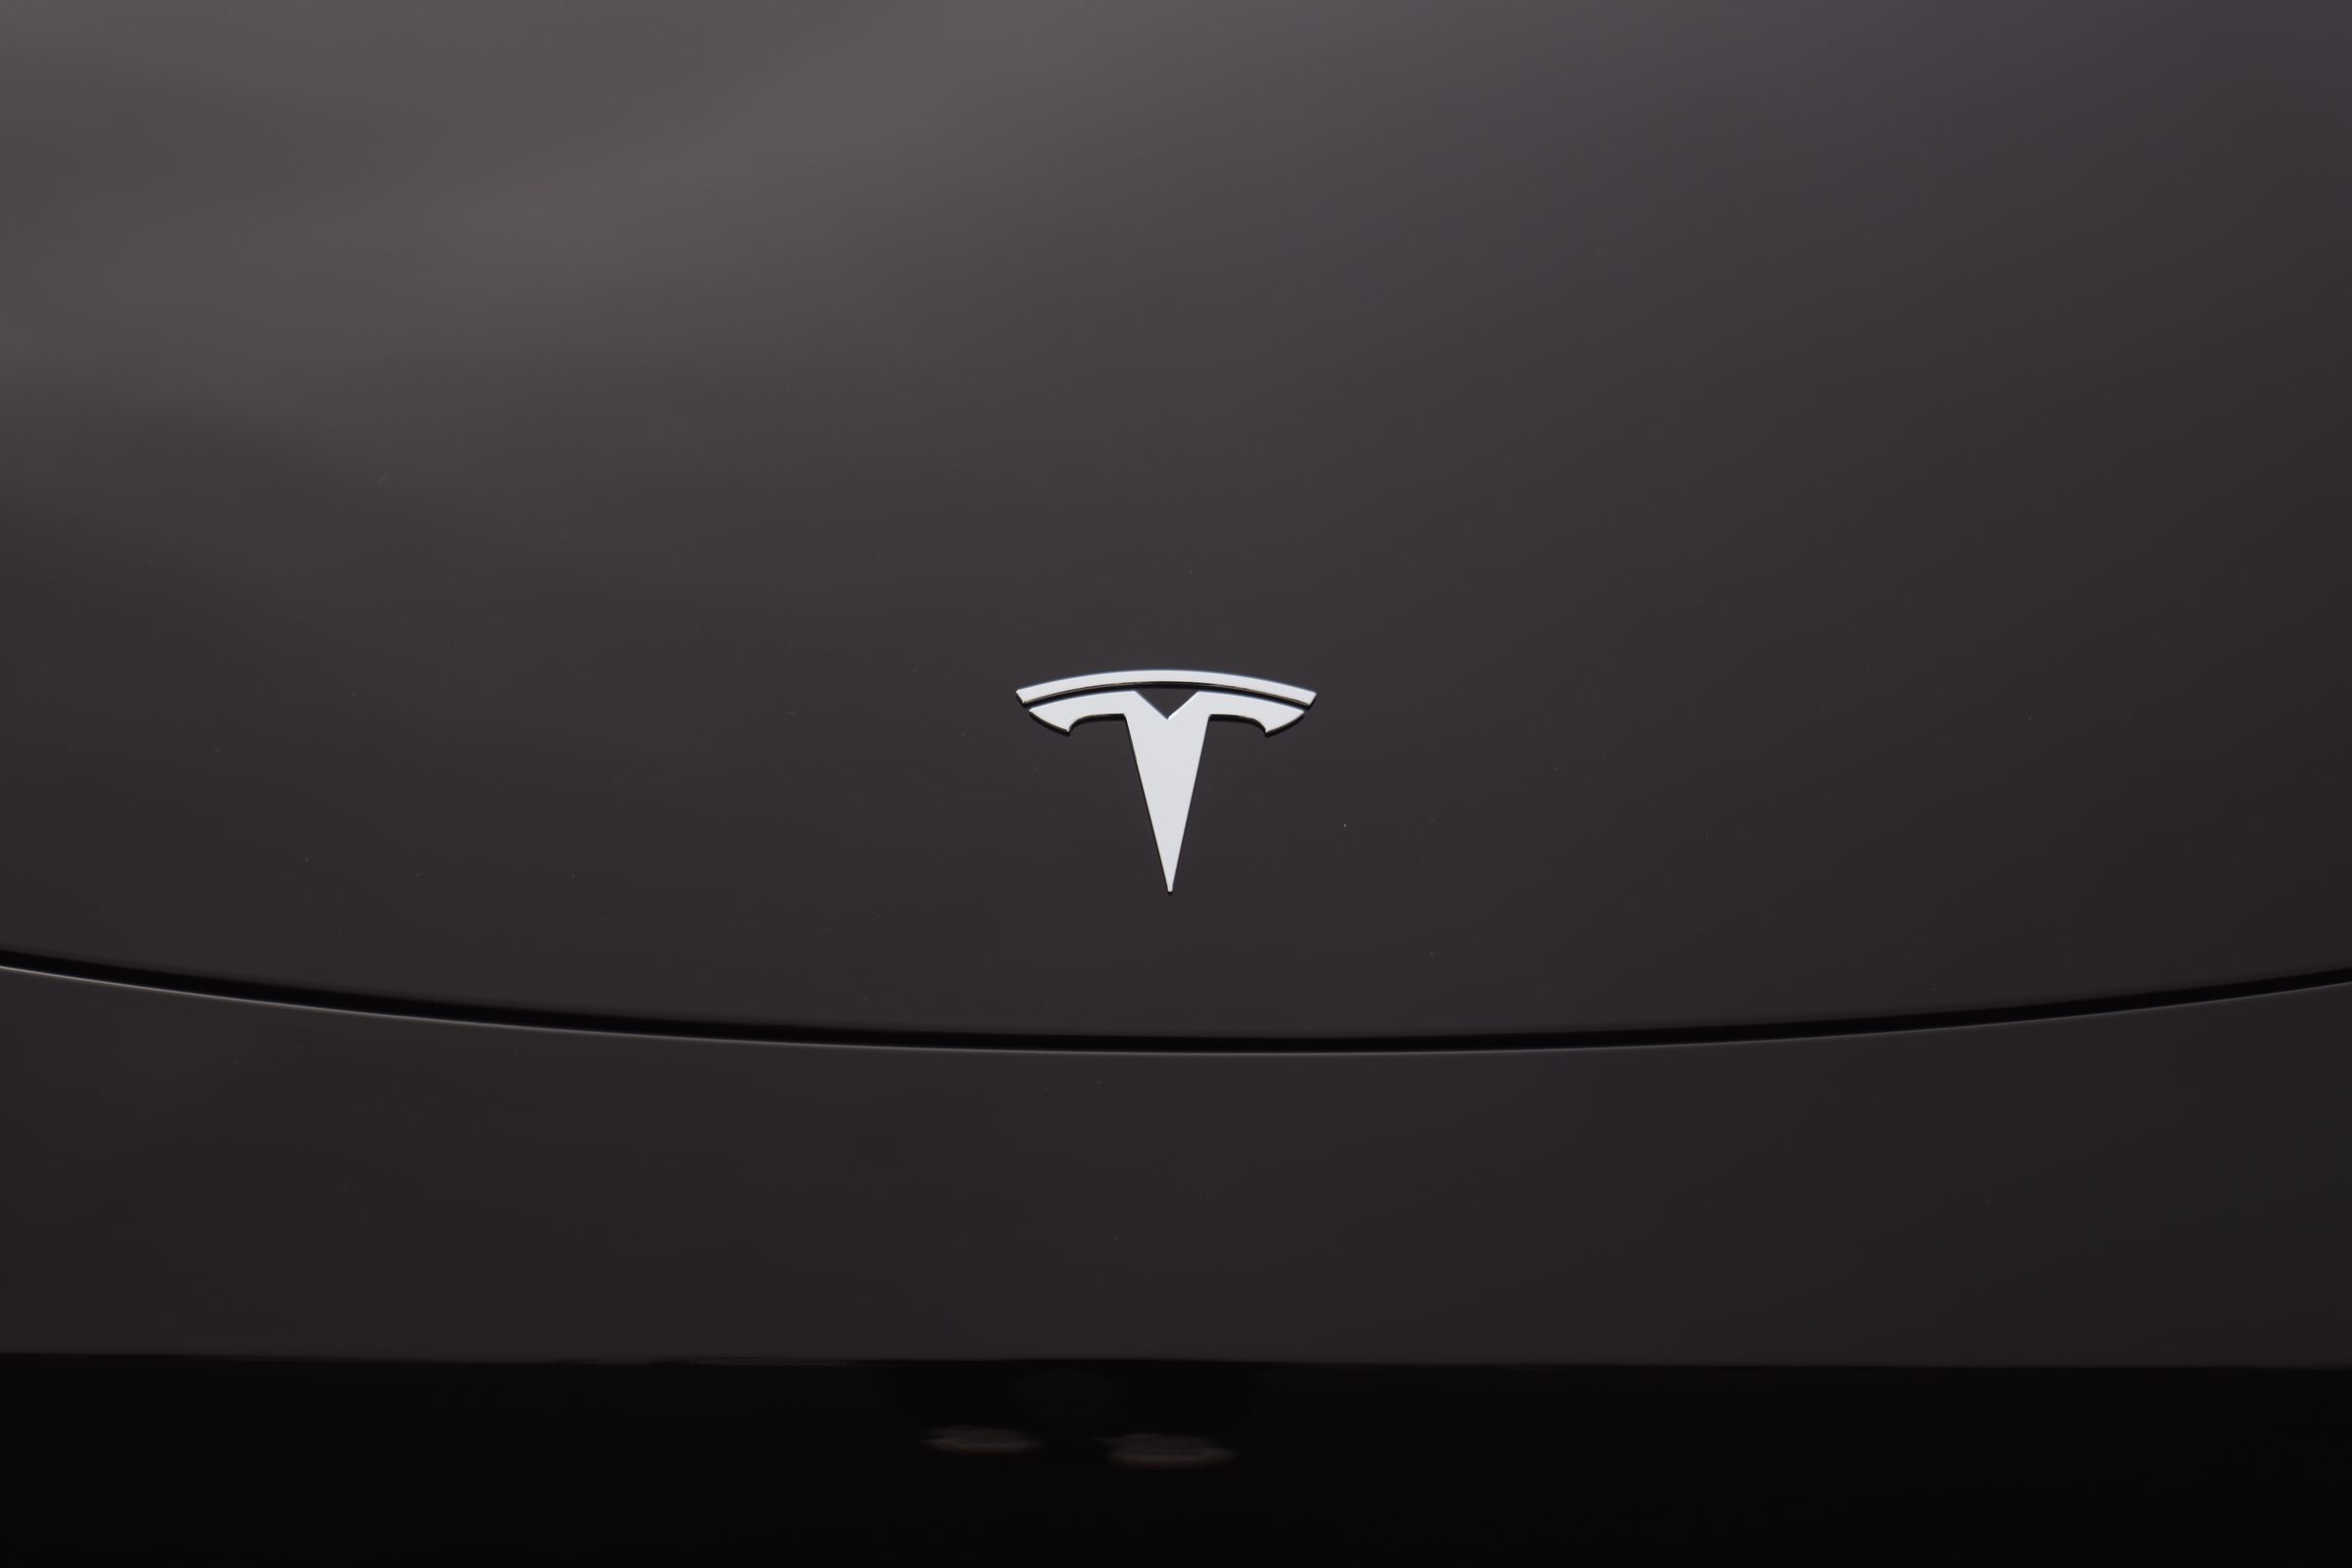 An image showing the Tesla logo on a black vehicle